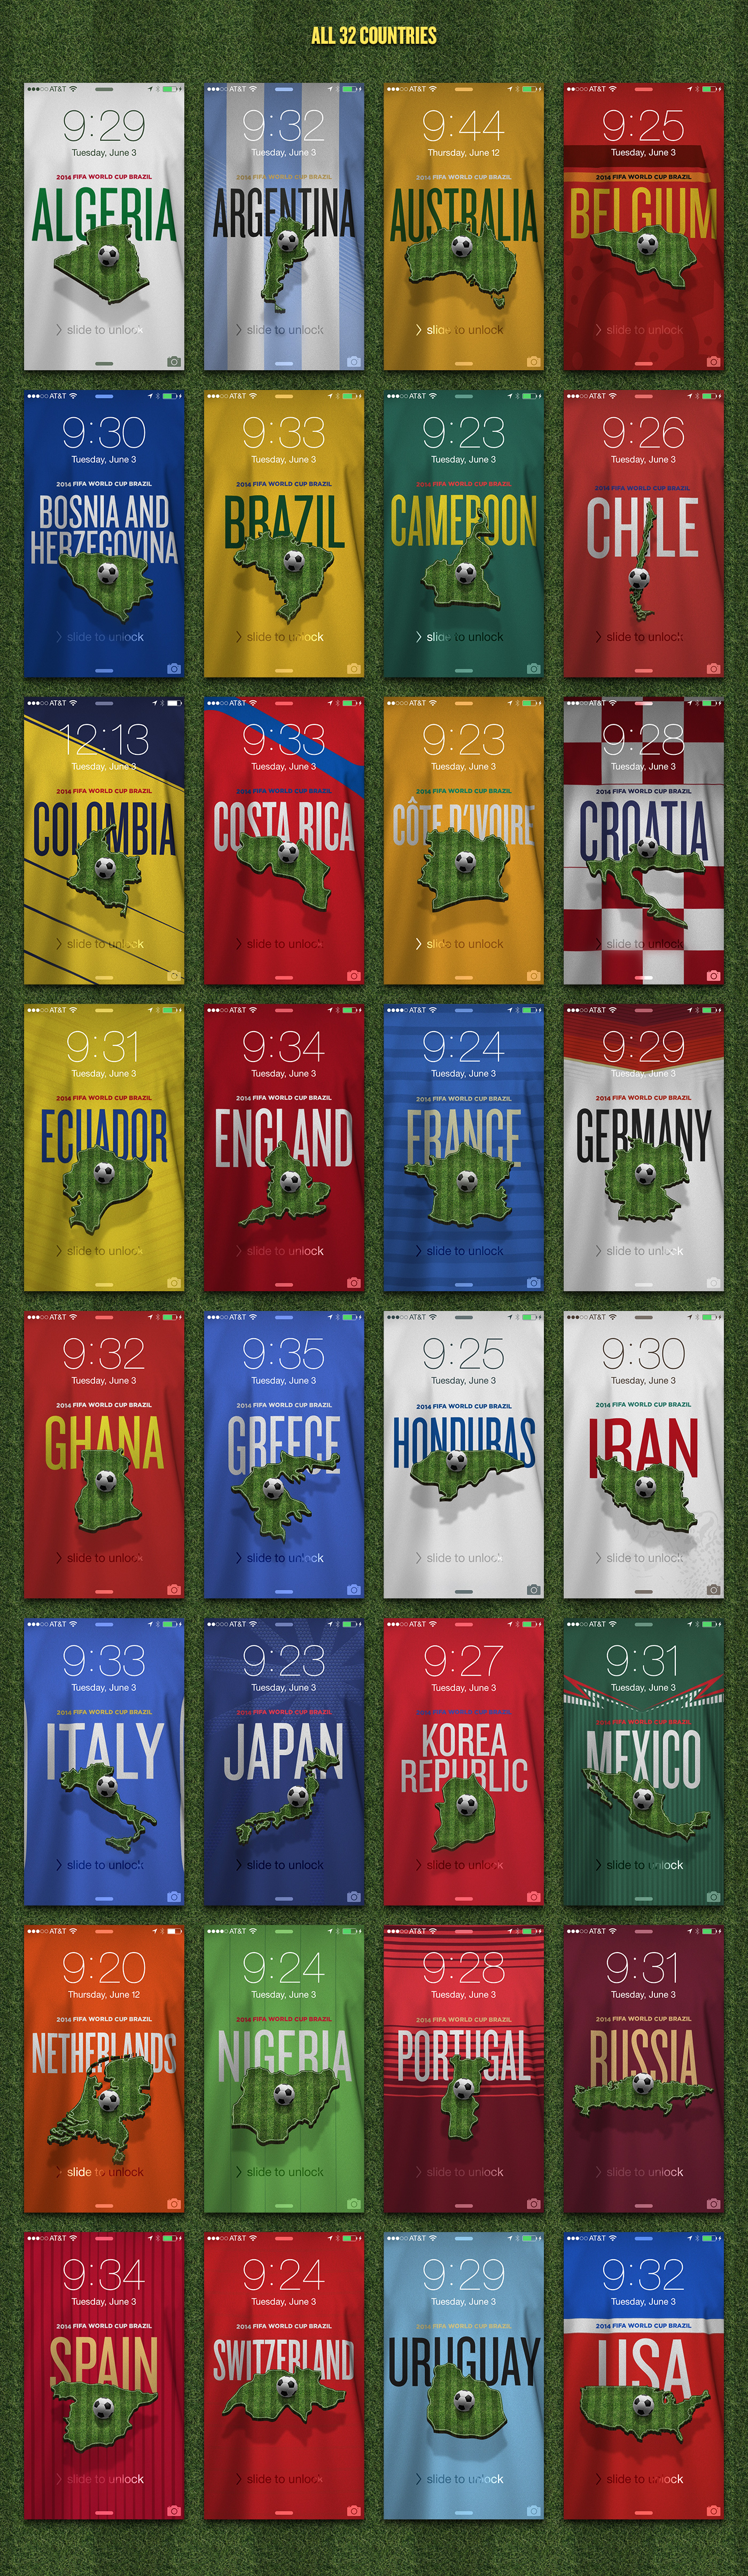 Wallpapers smartphone world cup